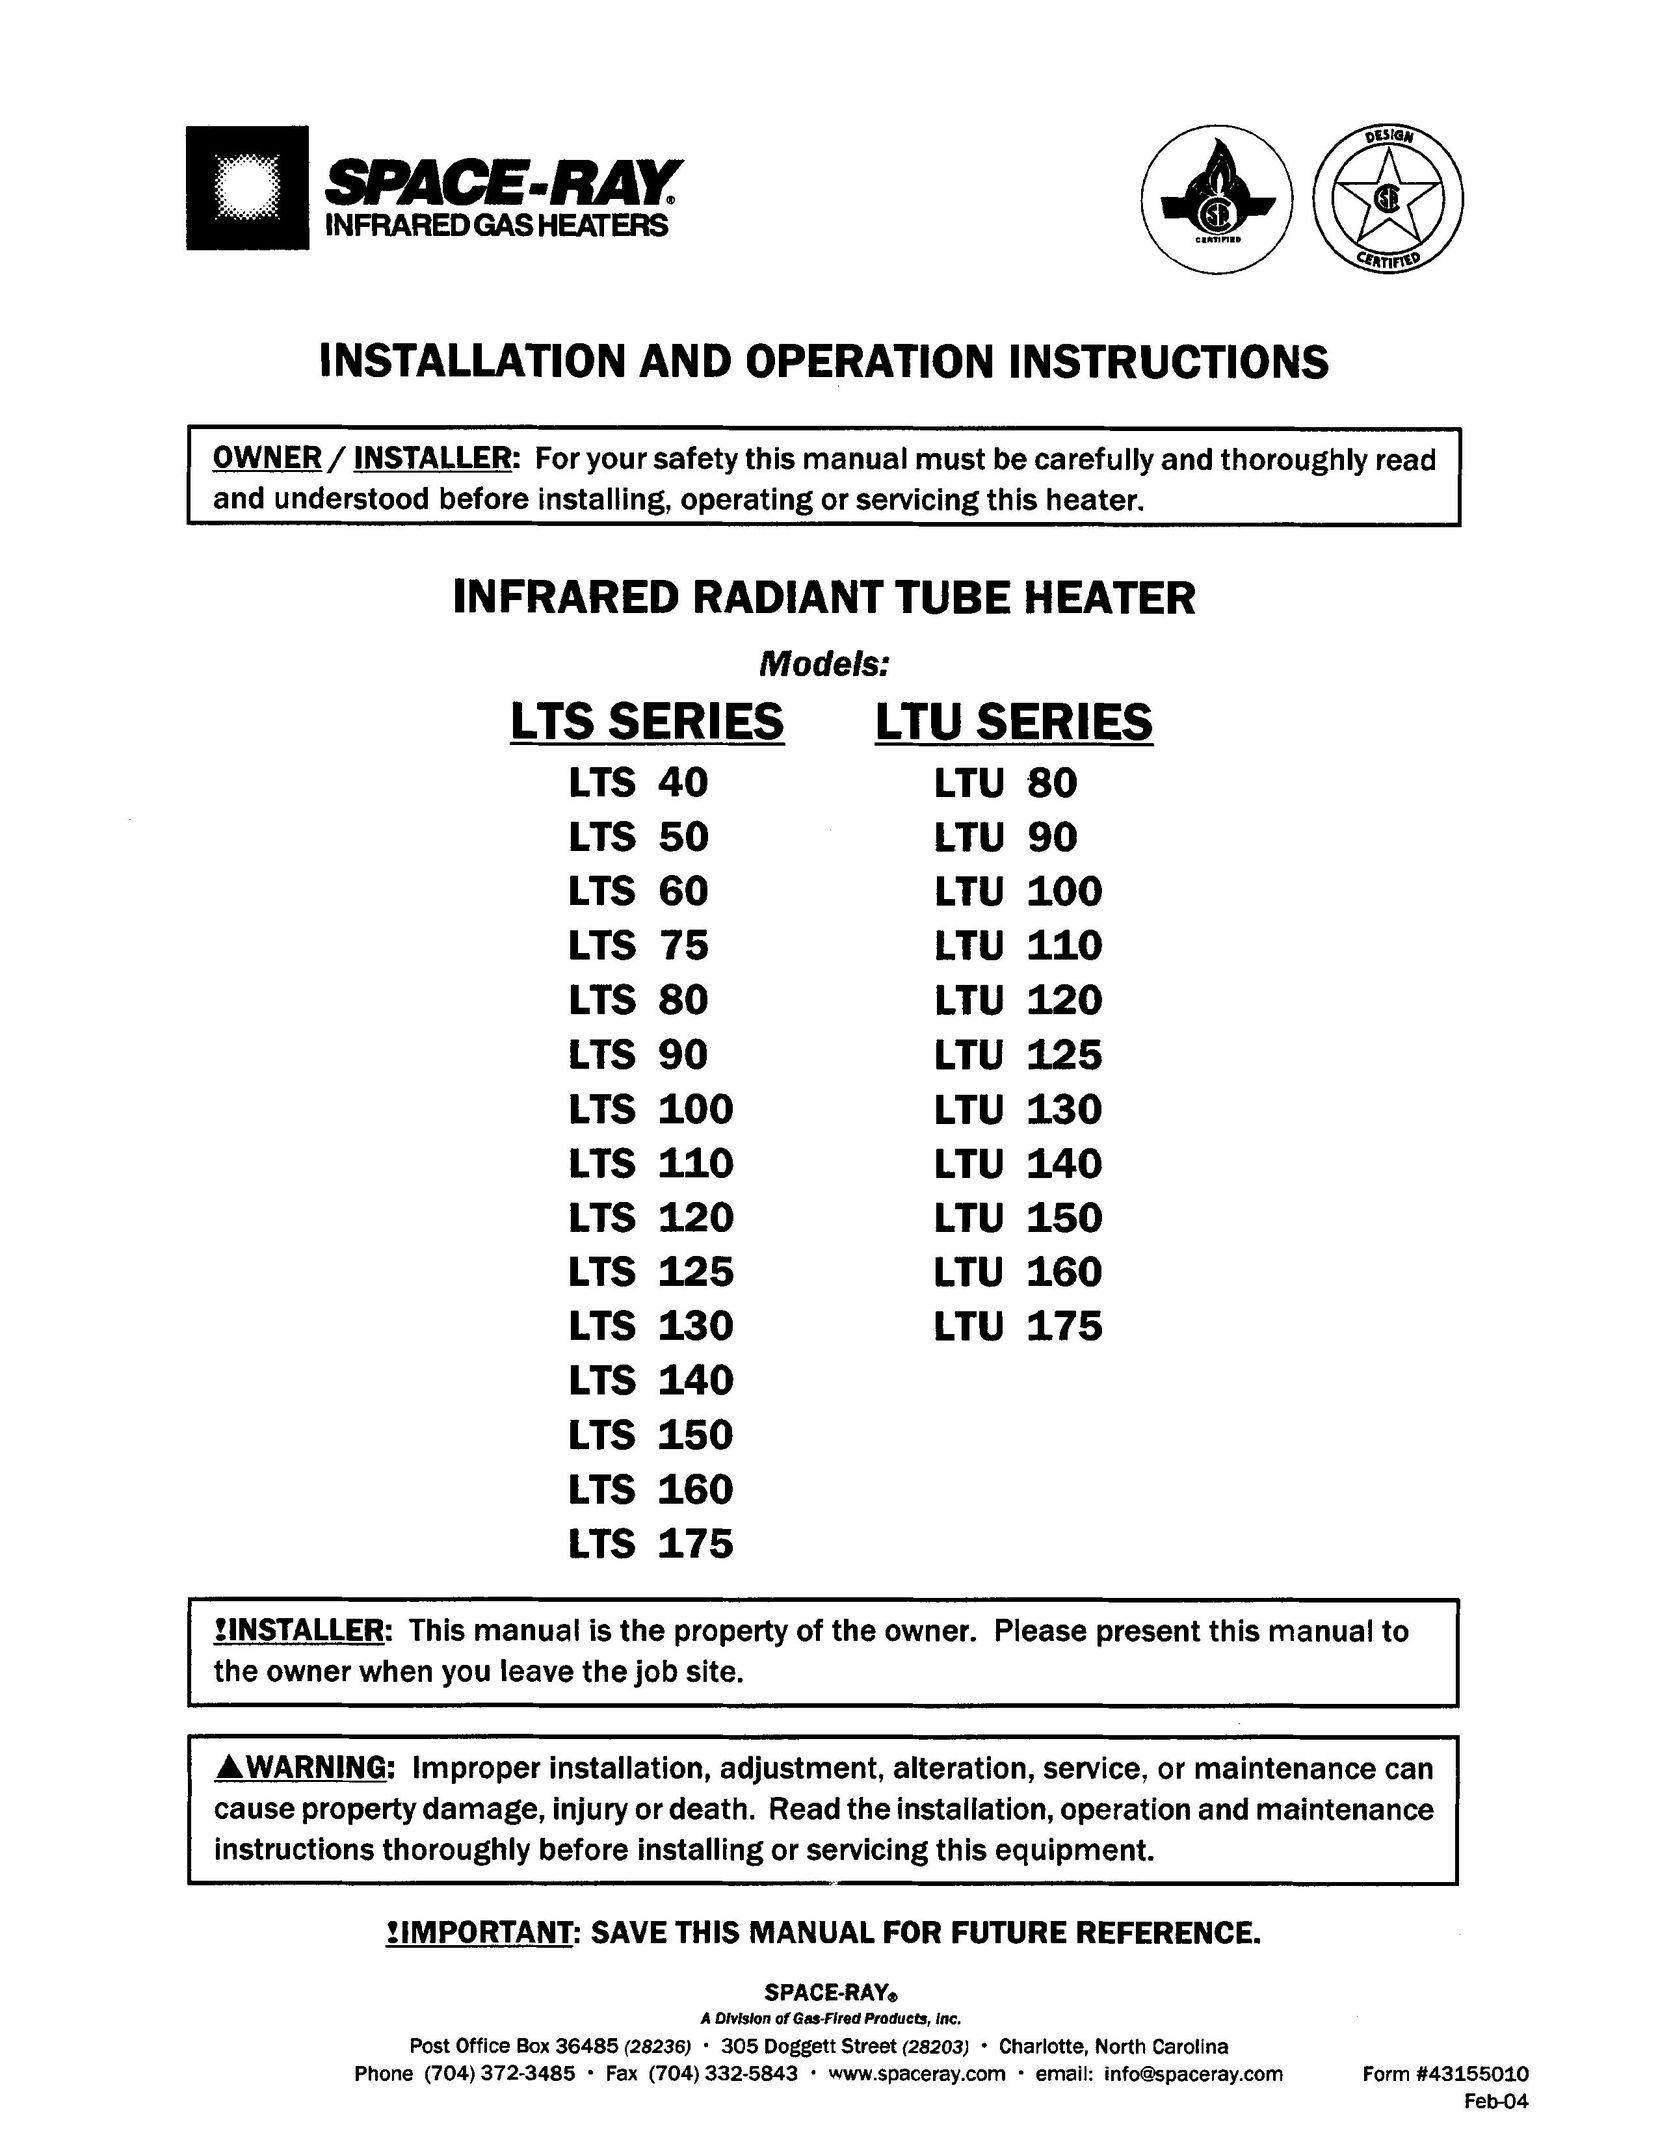 Gas-Fired Products LTS 130 Electric Heater User Manual